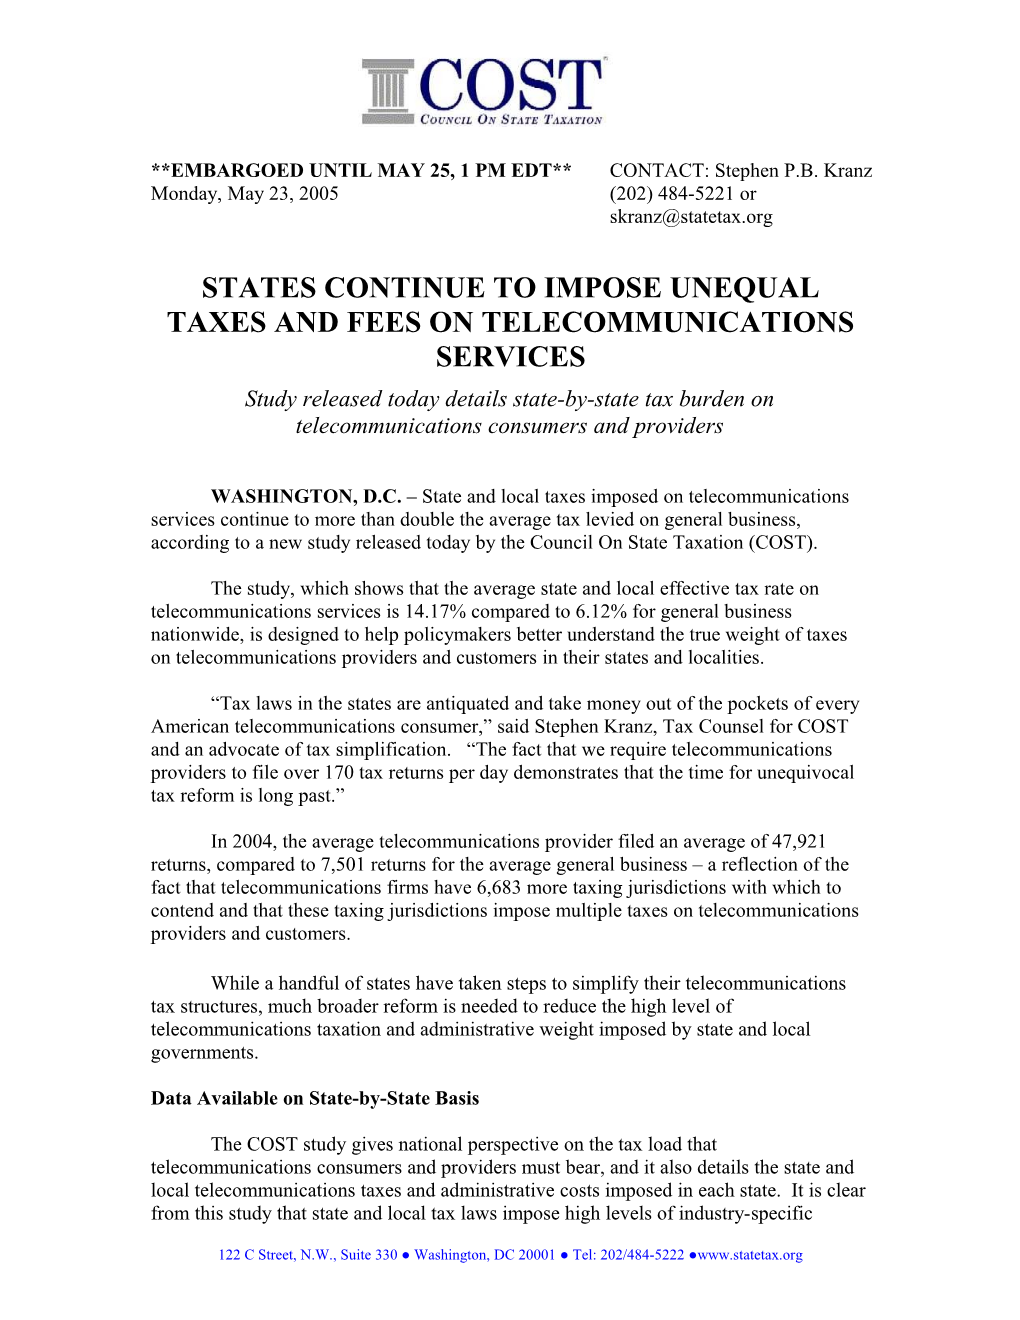 States Continue to Impose Unequal Taxes and Feeson Telecommunications Services